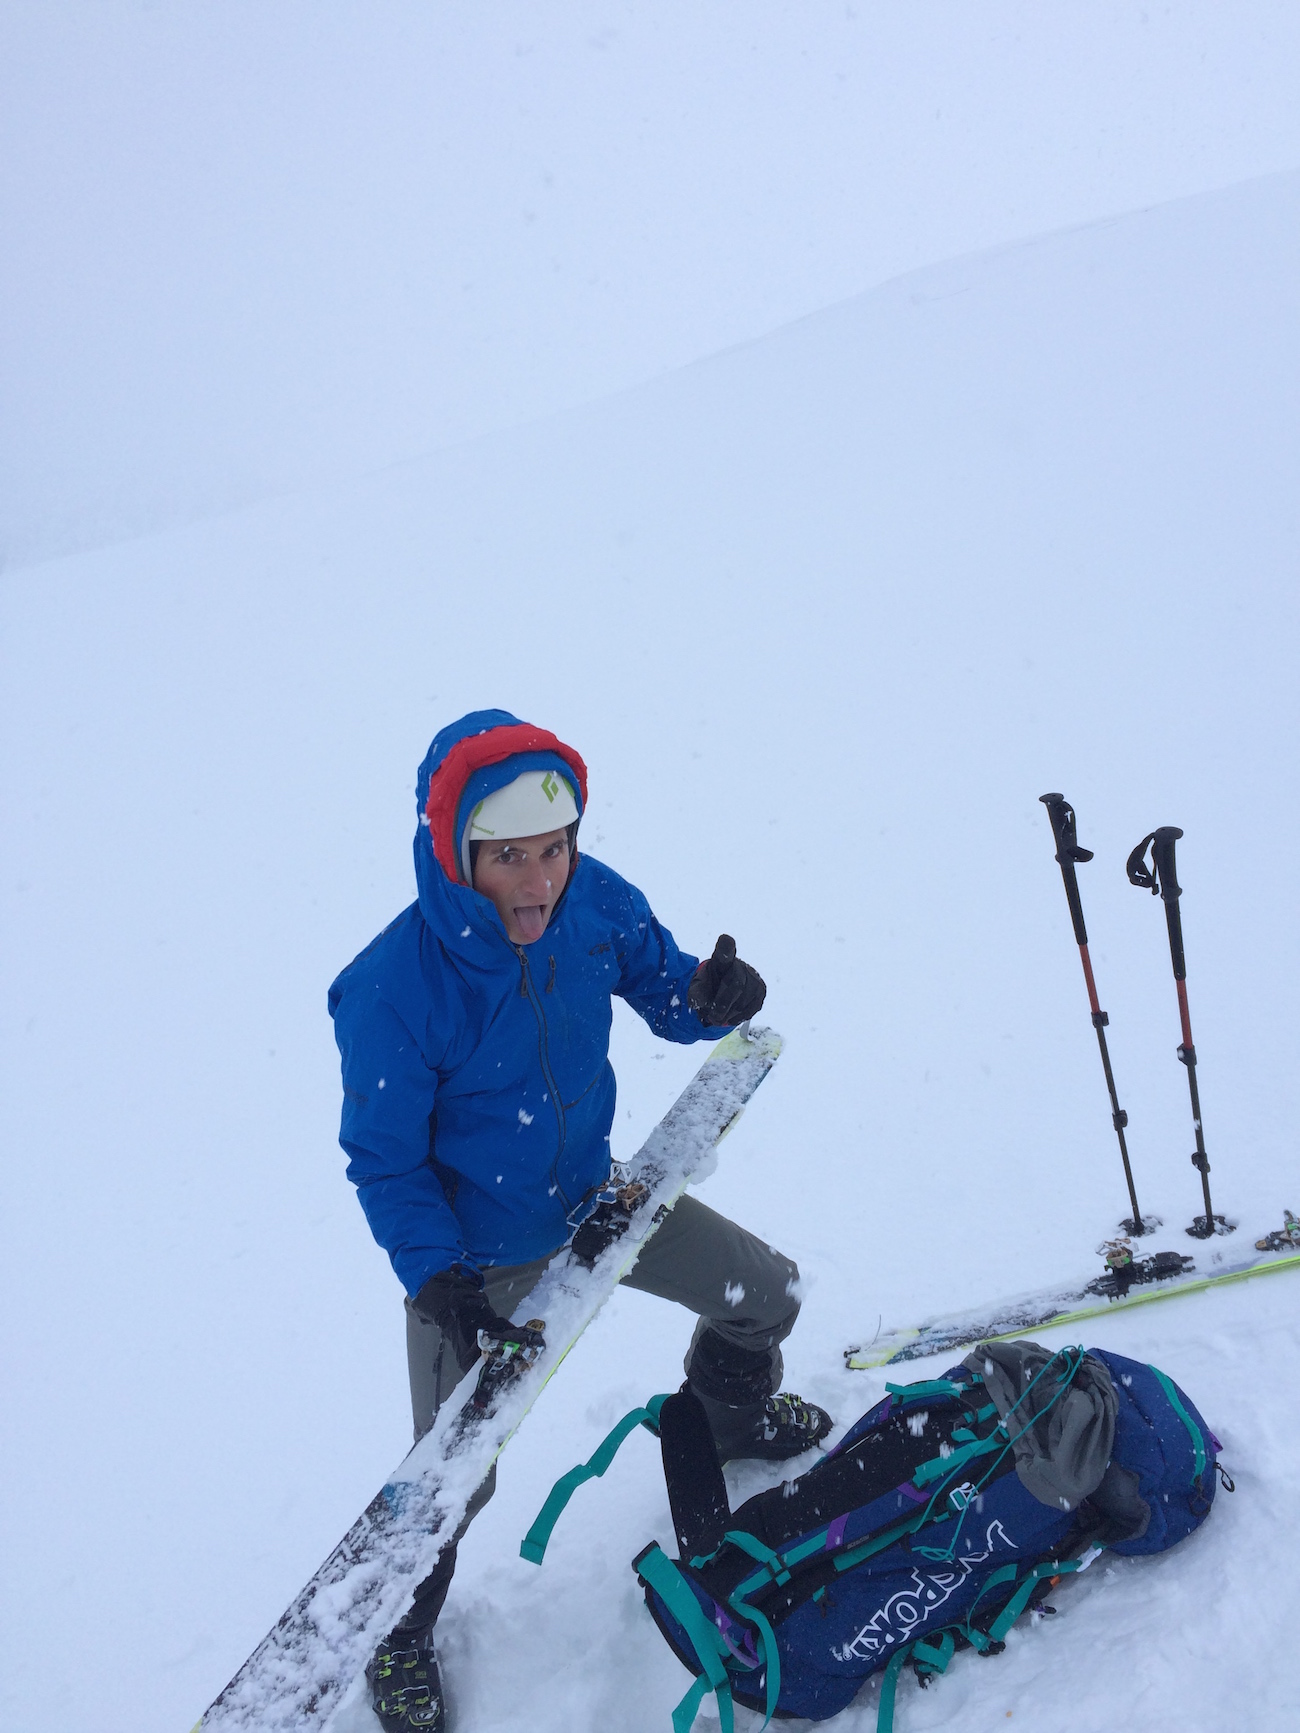 putting on skis in storm